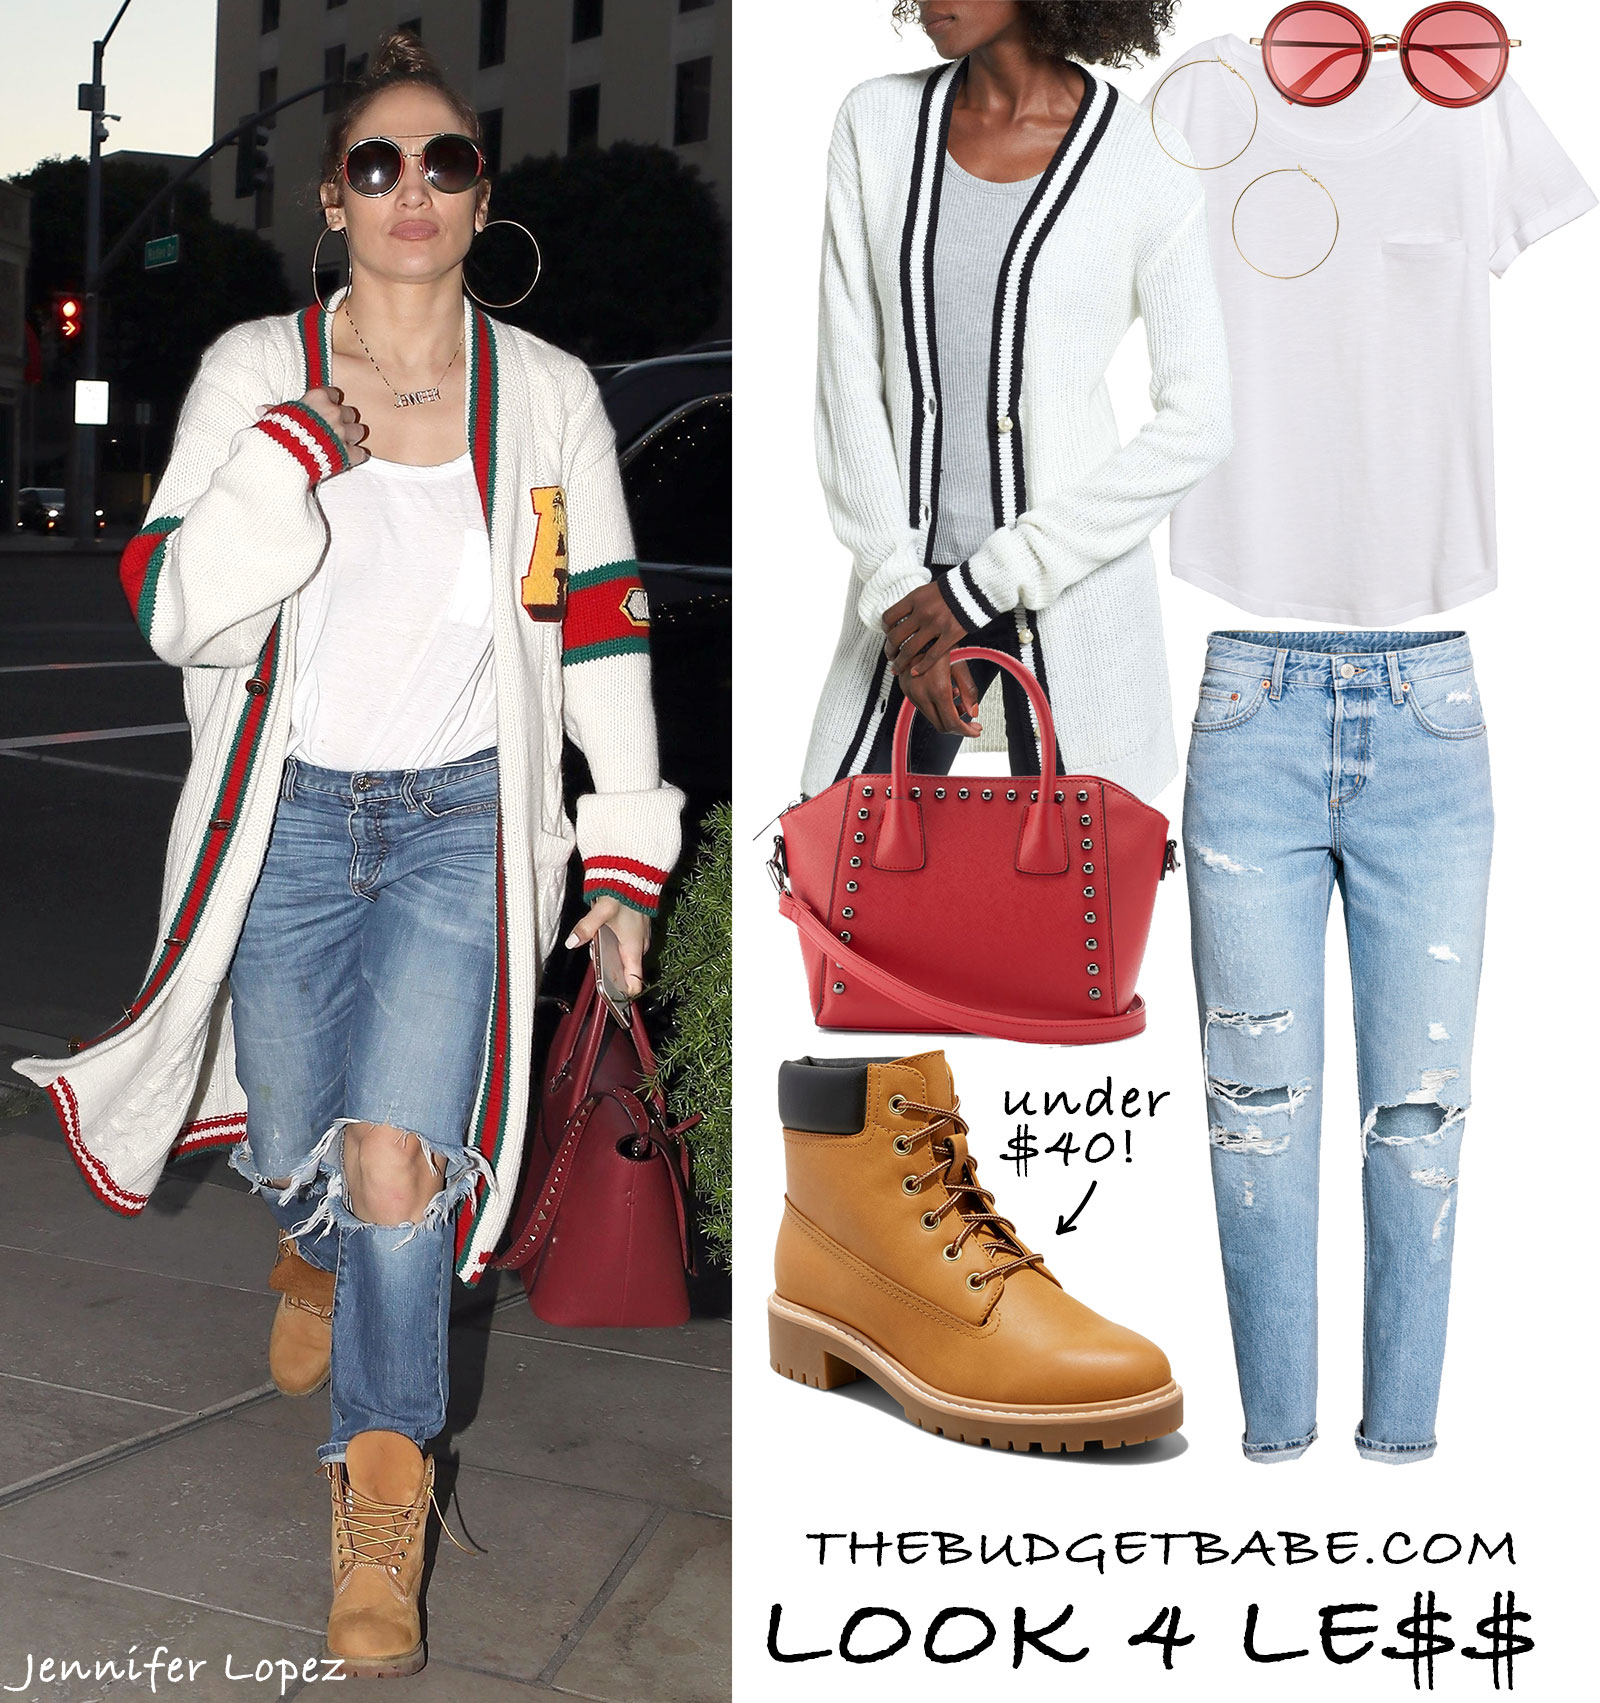 Jennifer Lopez wears a Gucci cardigan sweater with ripped jeans, Timberland boots and Valentino trapeze bag.